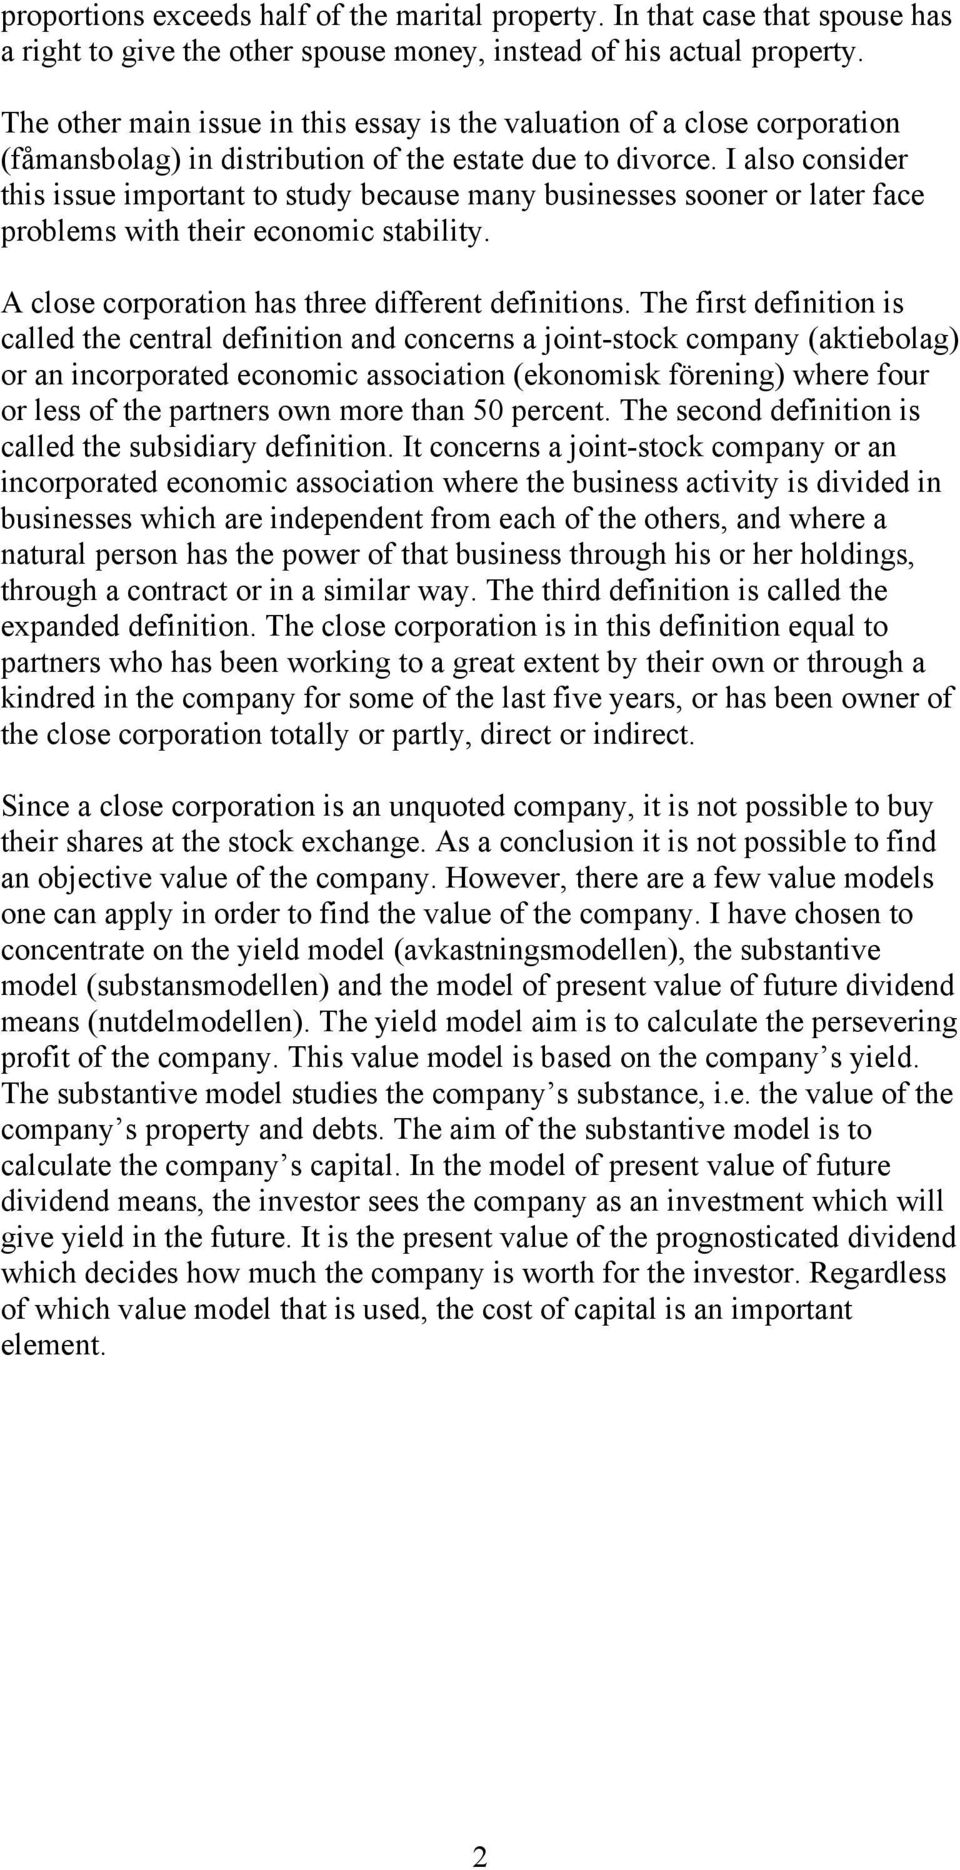 I also consider this issue important to study because many businesses sooner or later face problems with their economic stability. A close corporation has three different definitions.